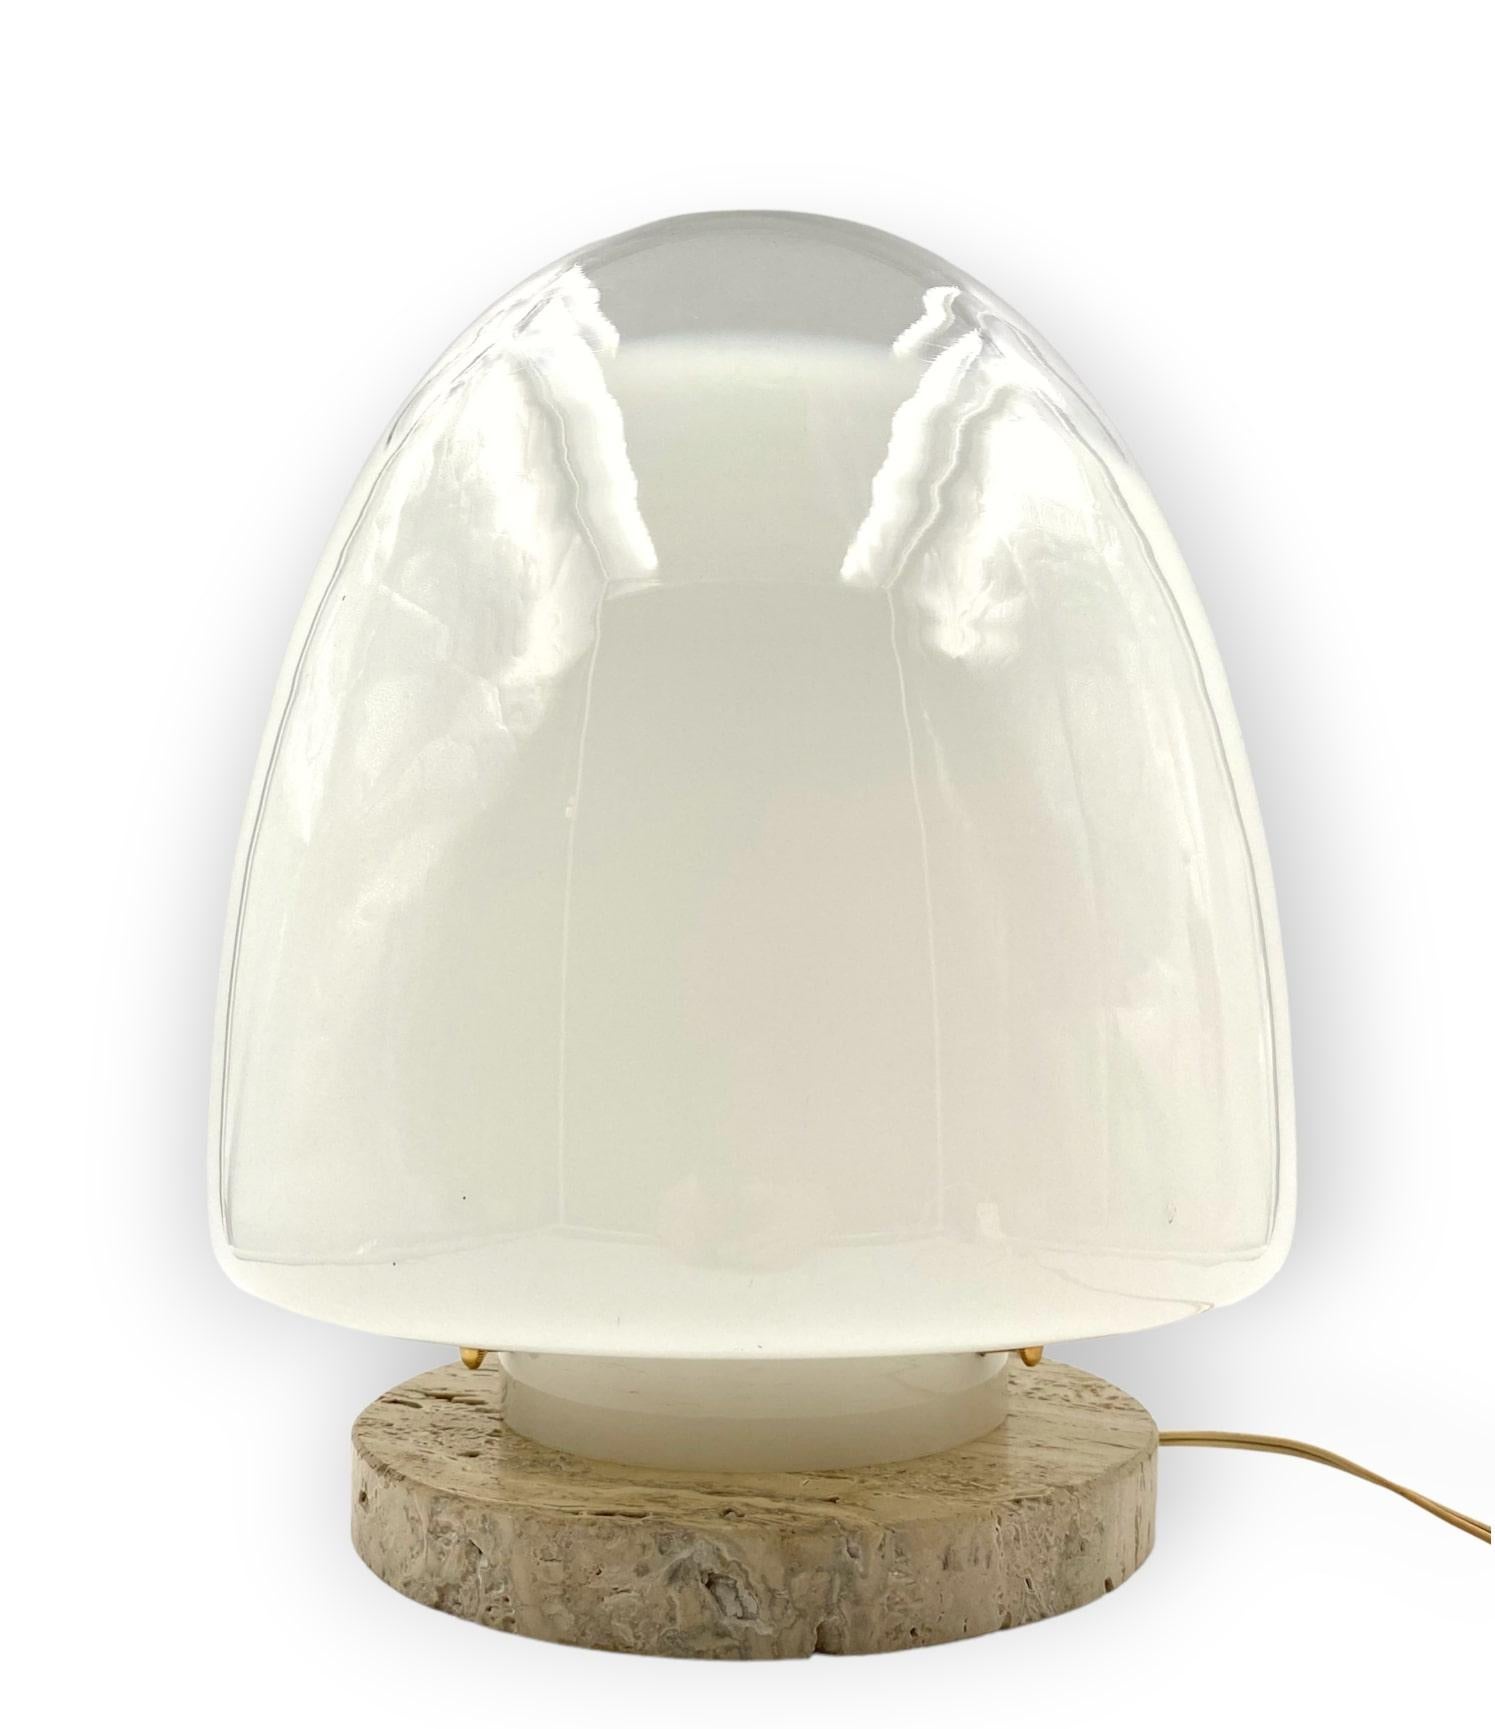 Giusto Toso Murano Art Glass and Travertine Table Lamp, Leucos, Italy, 1970s For Sale 1